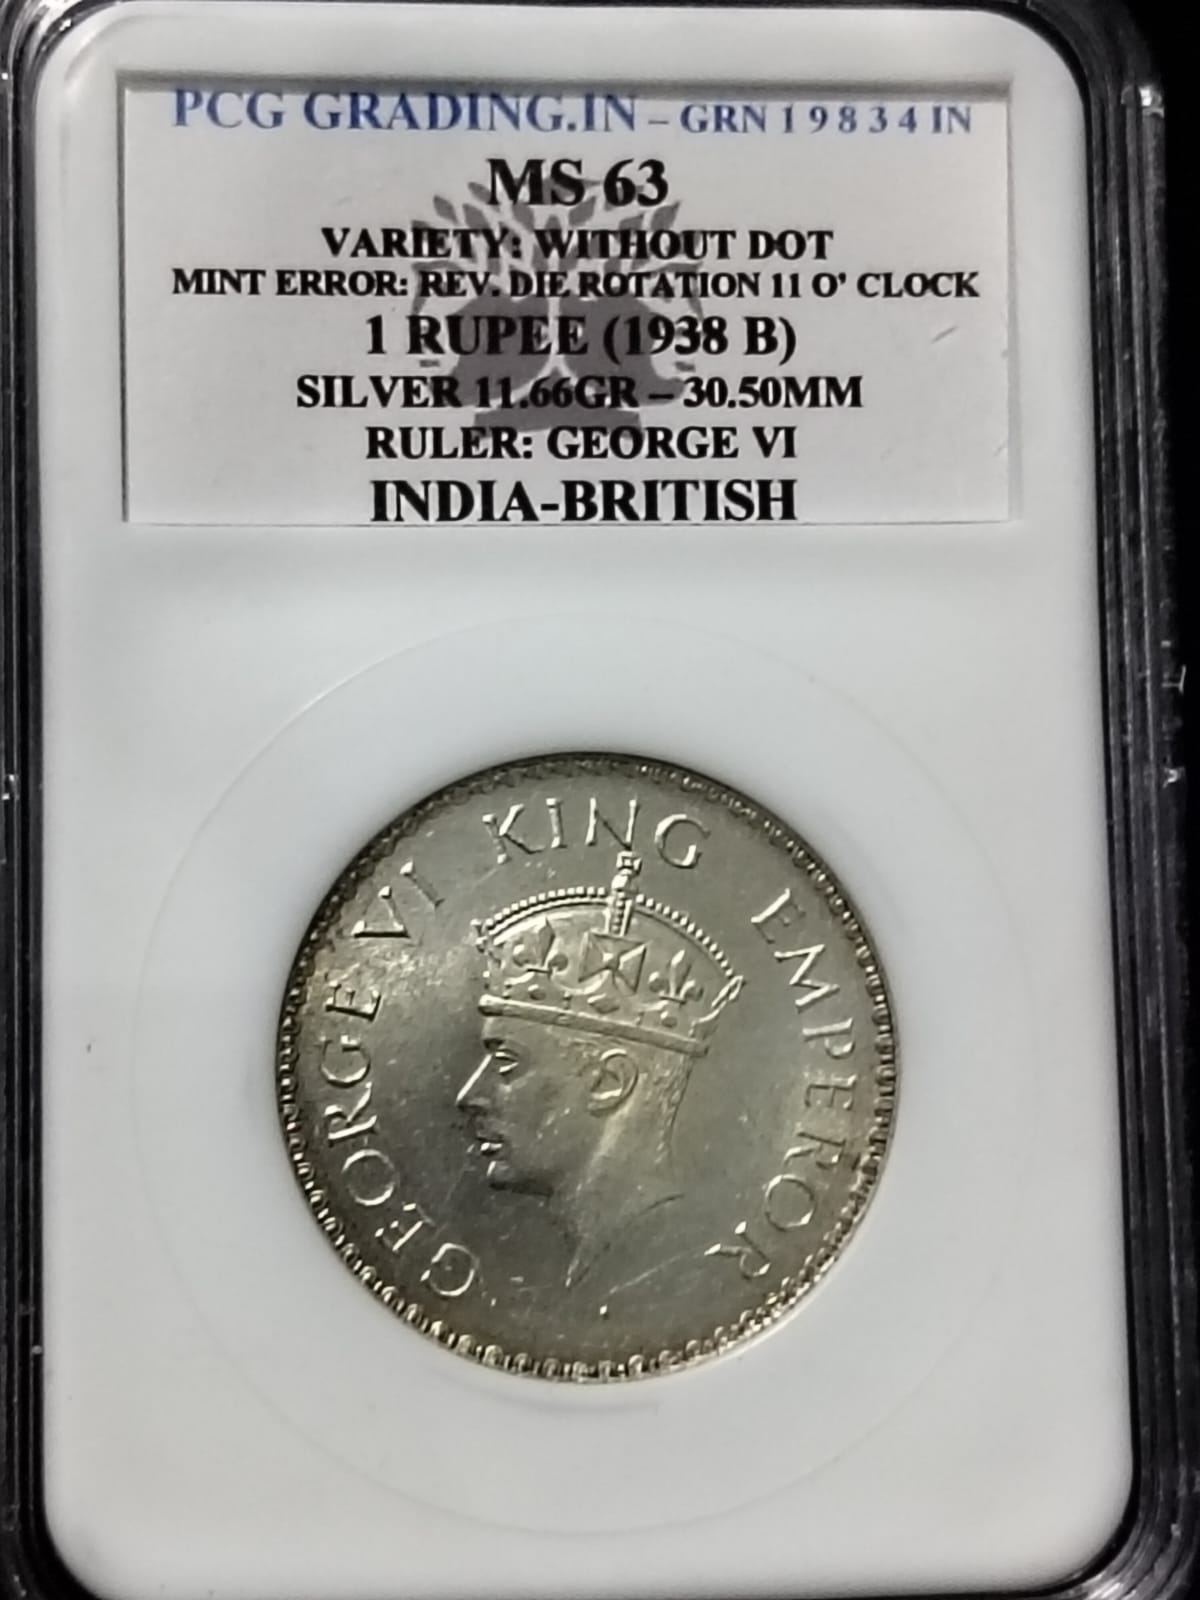 Extremely Rare One Rupee 1938 NGC Graded in MS 63 Grade George VI King Emperor British India Silver Coin